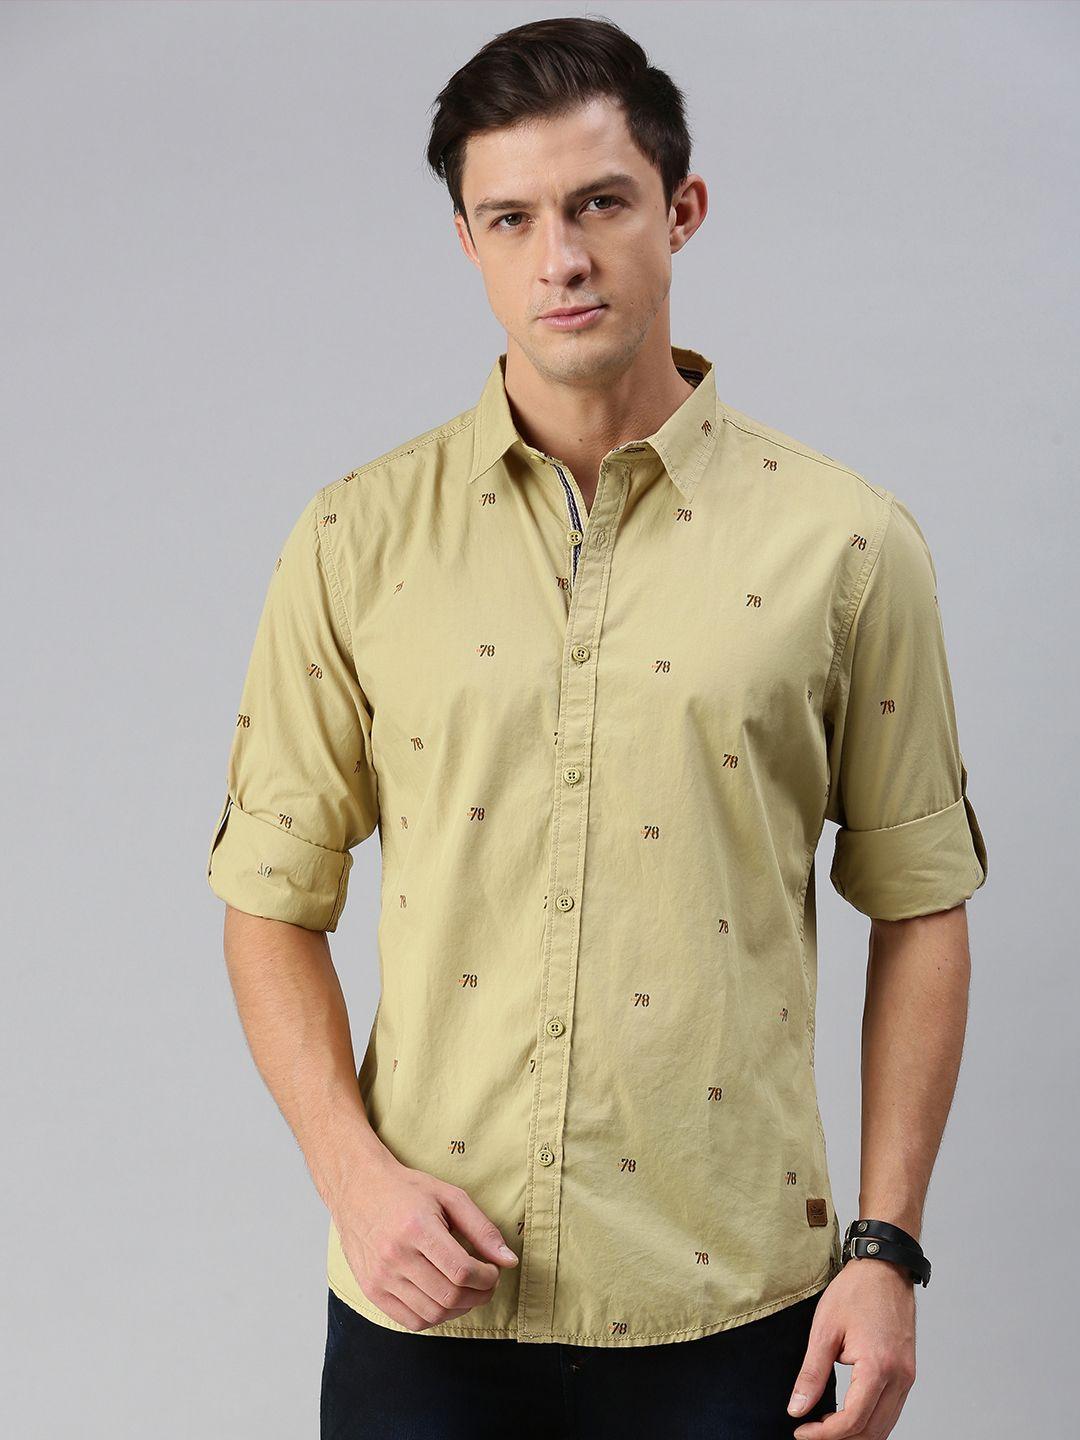 the roadster lifestyle co men beige & brown printed casual shirt